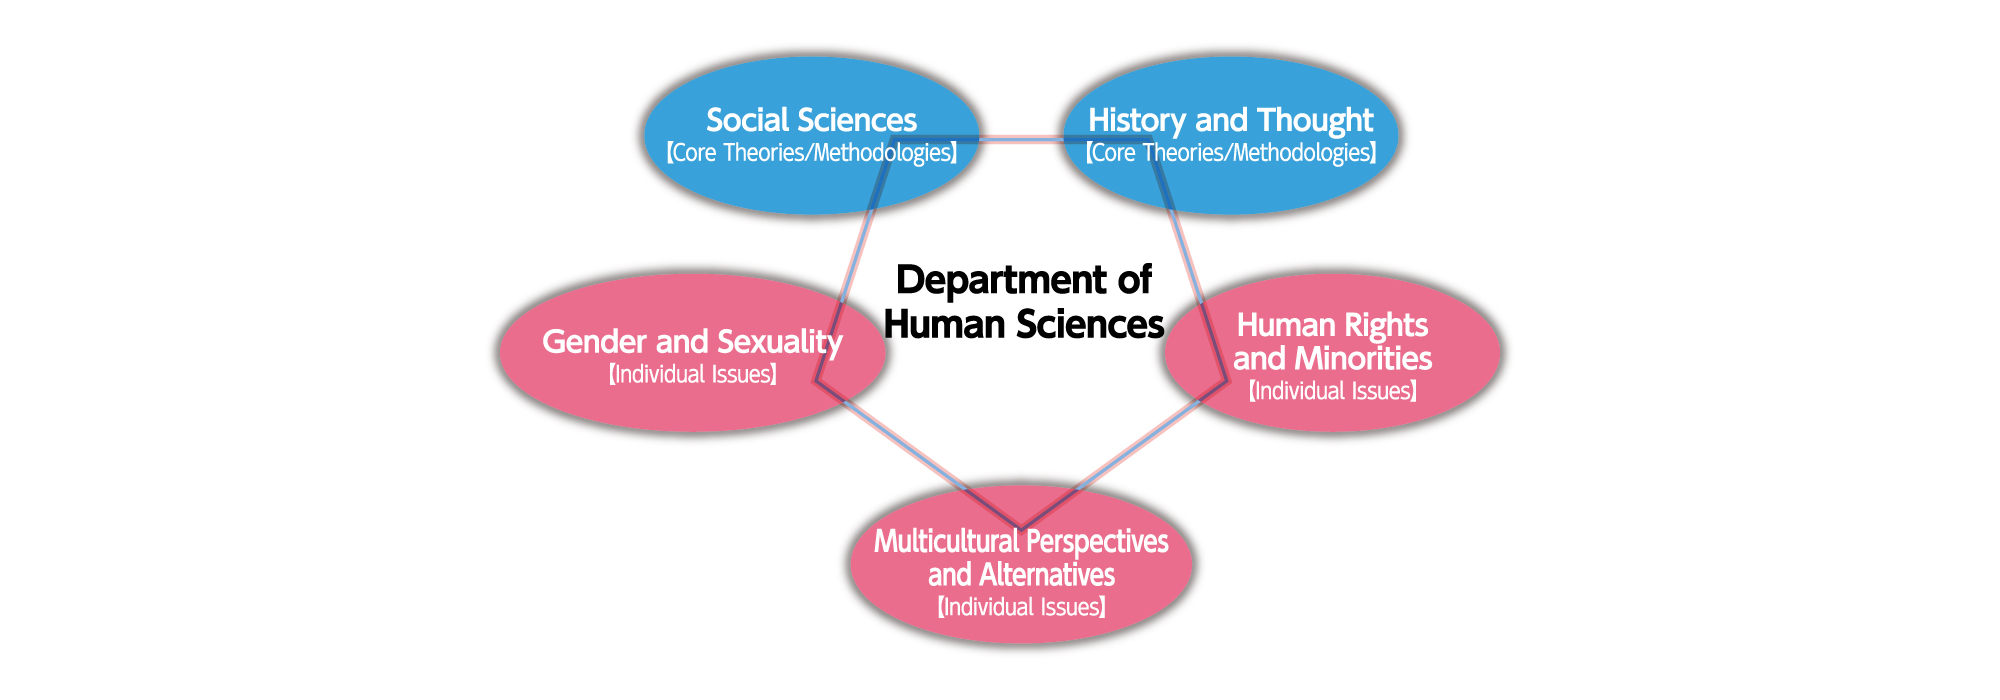 Overview of the Department of Human Sciences